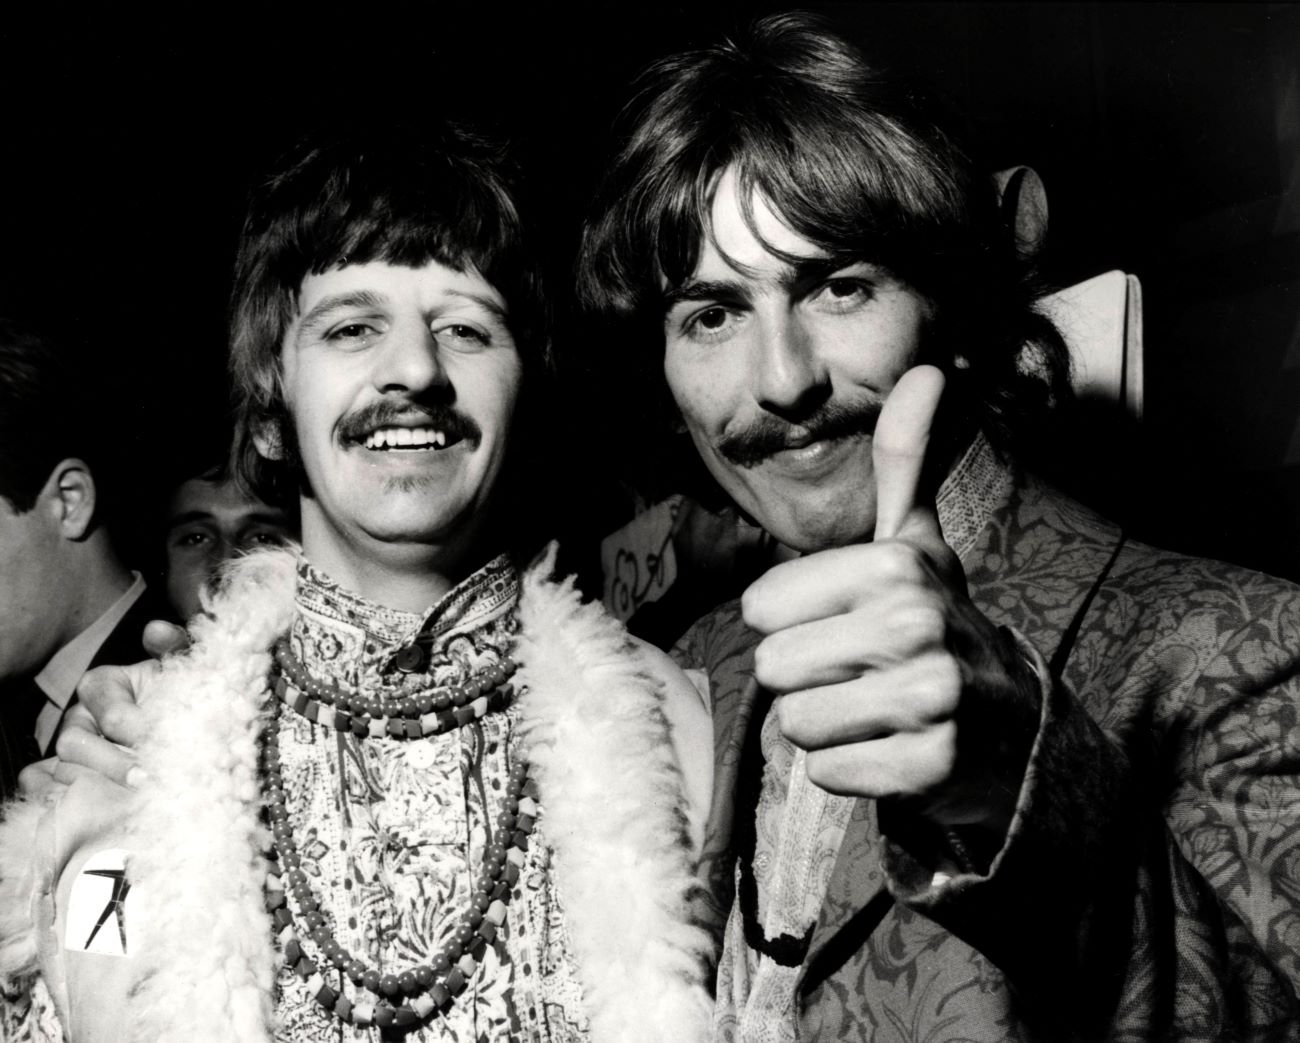 A black and white picture of George Harrison with his arm around Ringo Starr and giving a thumbs up.